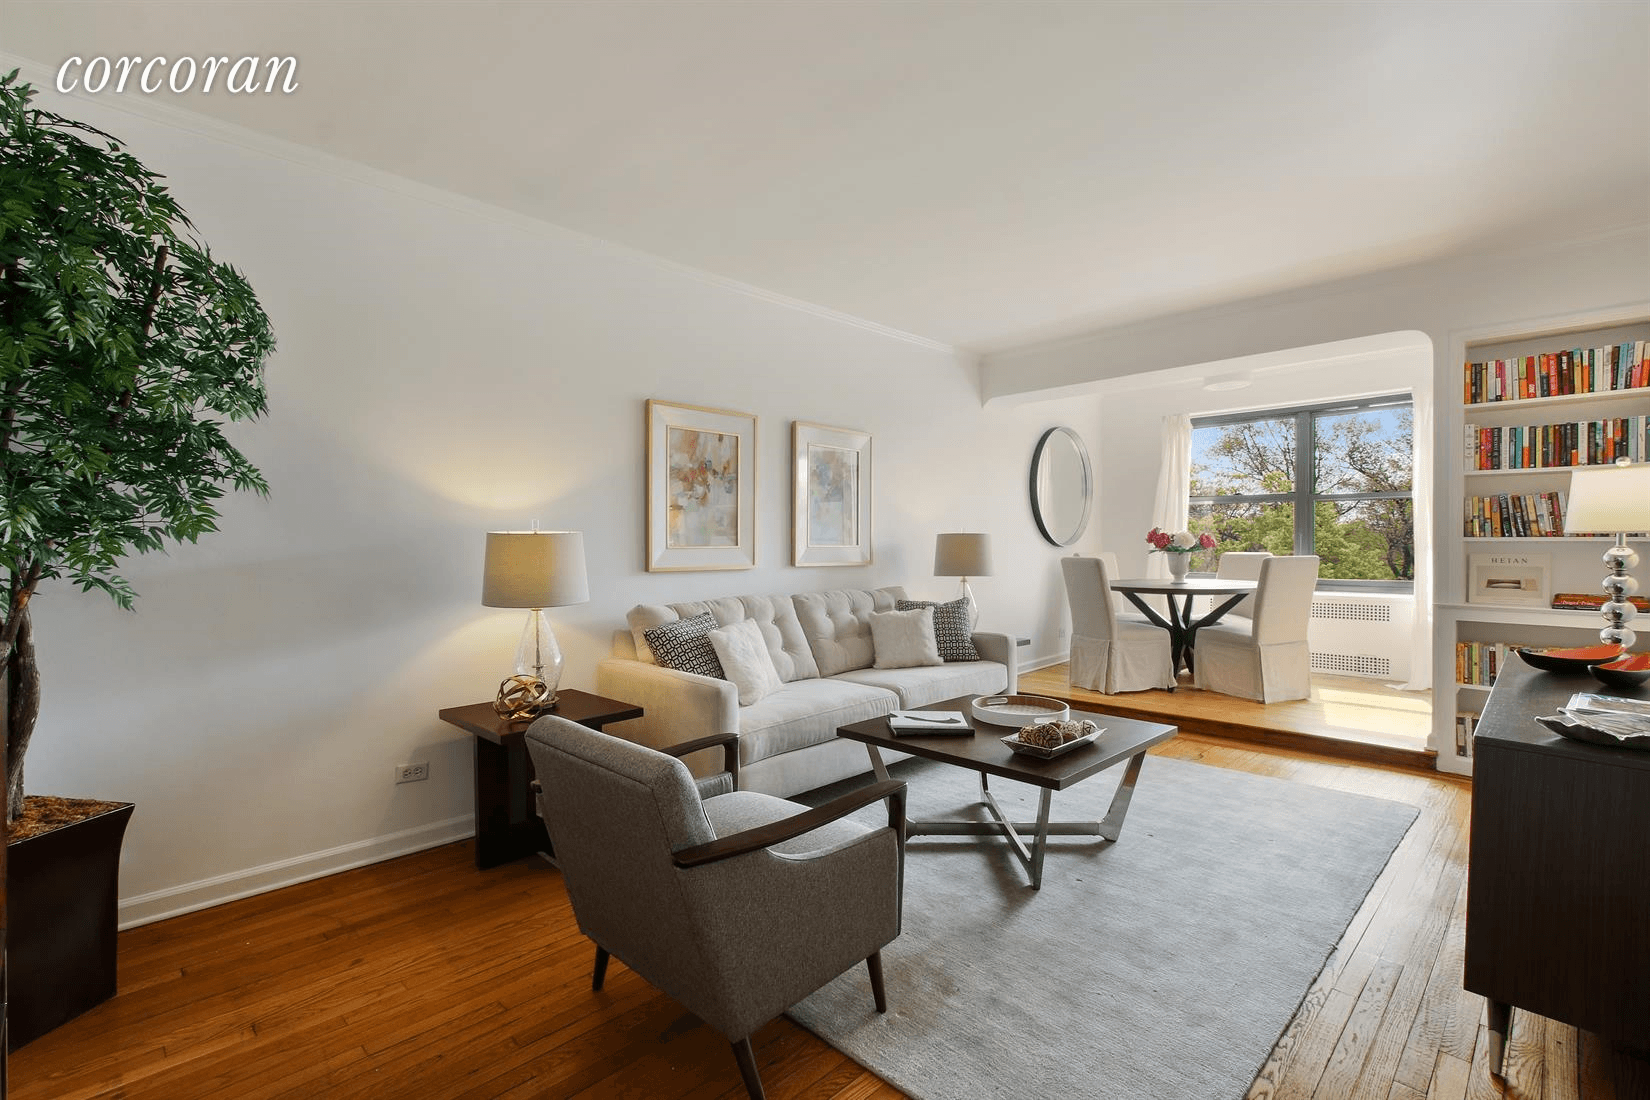 Incredible opportunity to create a home with 4 rooms facing Central Park.